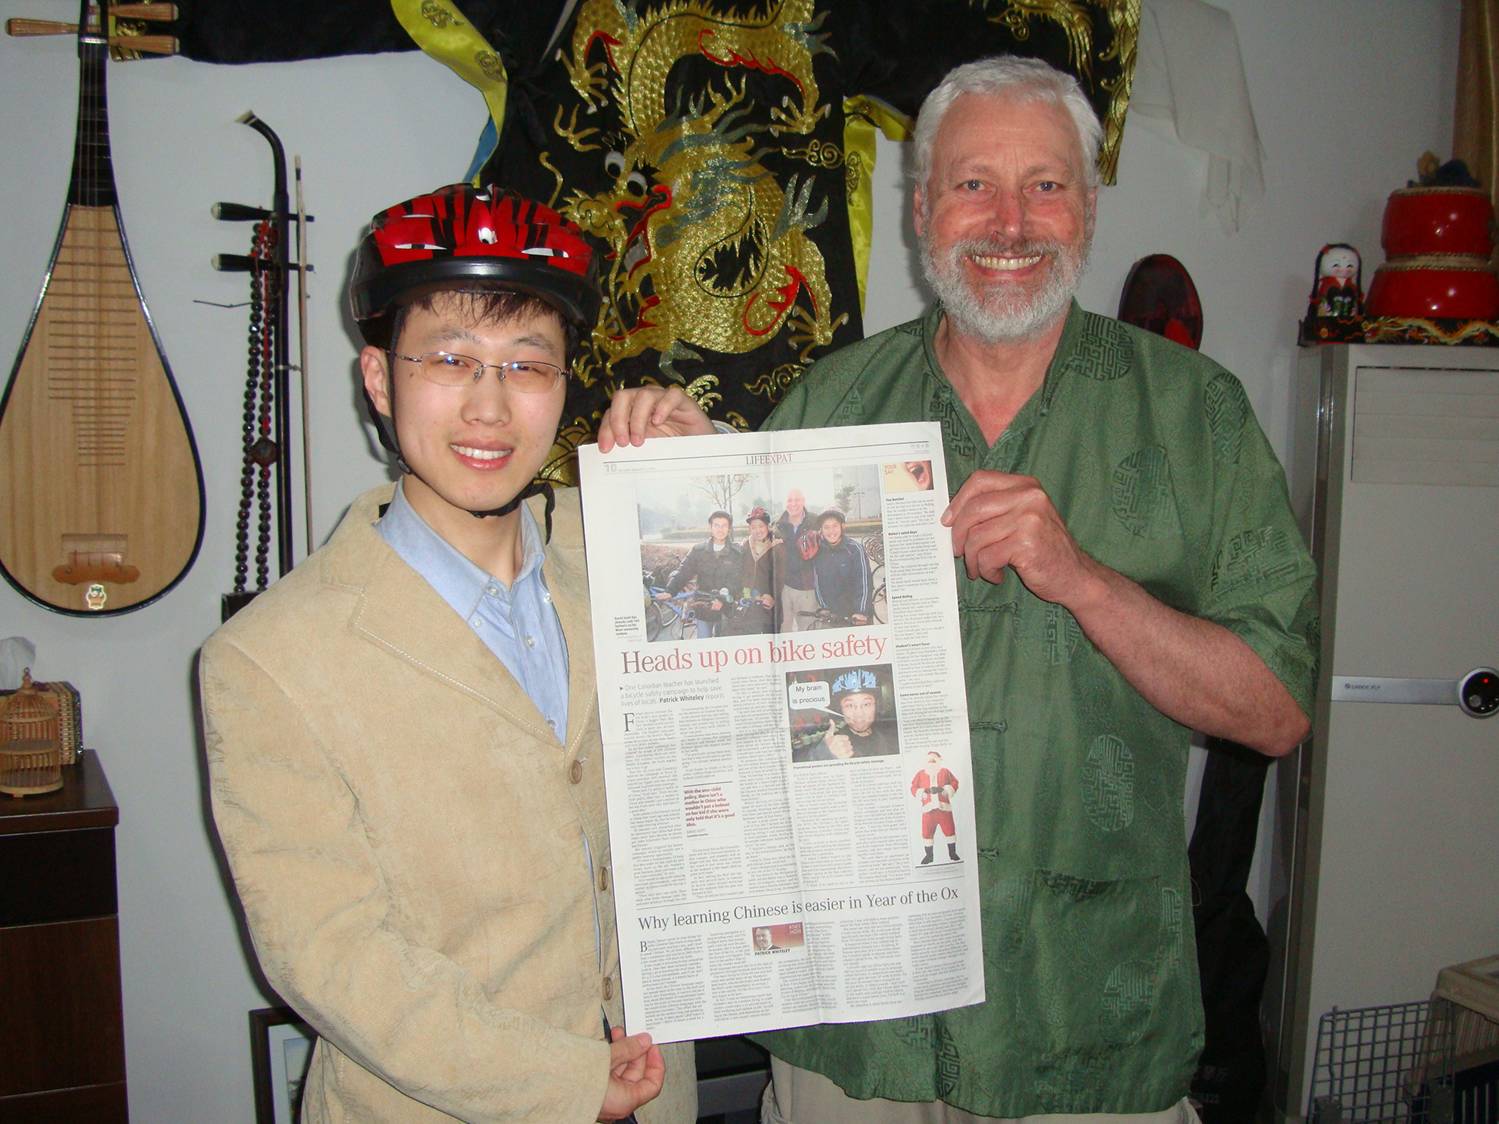 Picture: William and David with China Daily article,  Jiangnan Universisty, Wuxi, China. William's younger brother wanted a picture of the China Daily article.